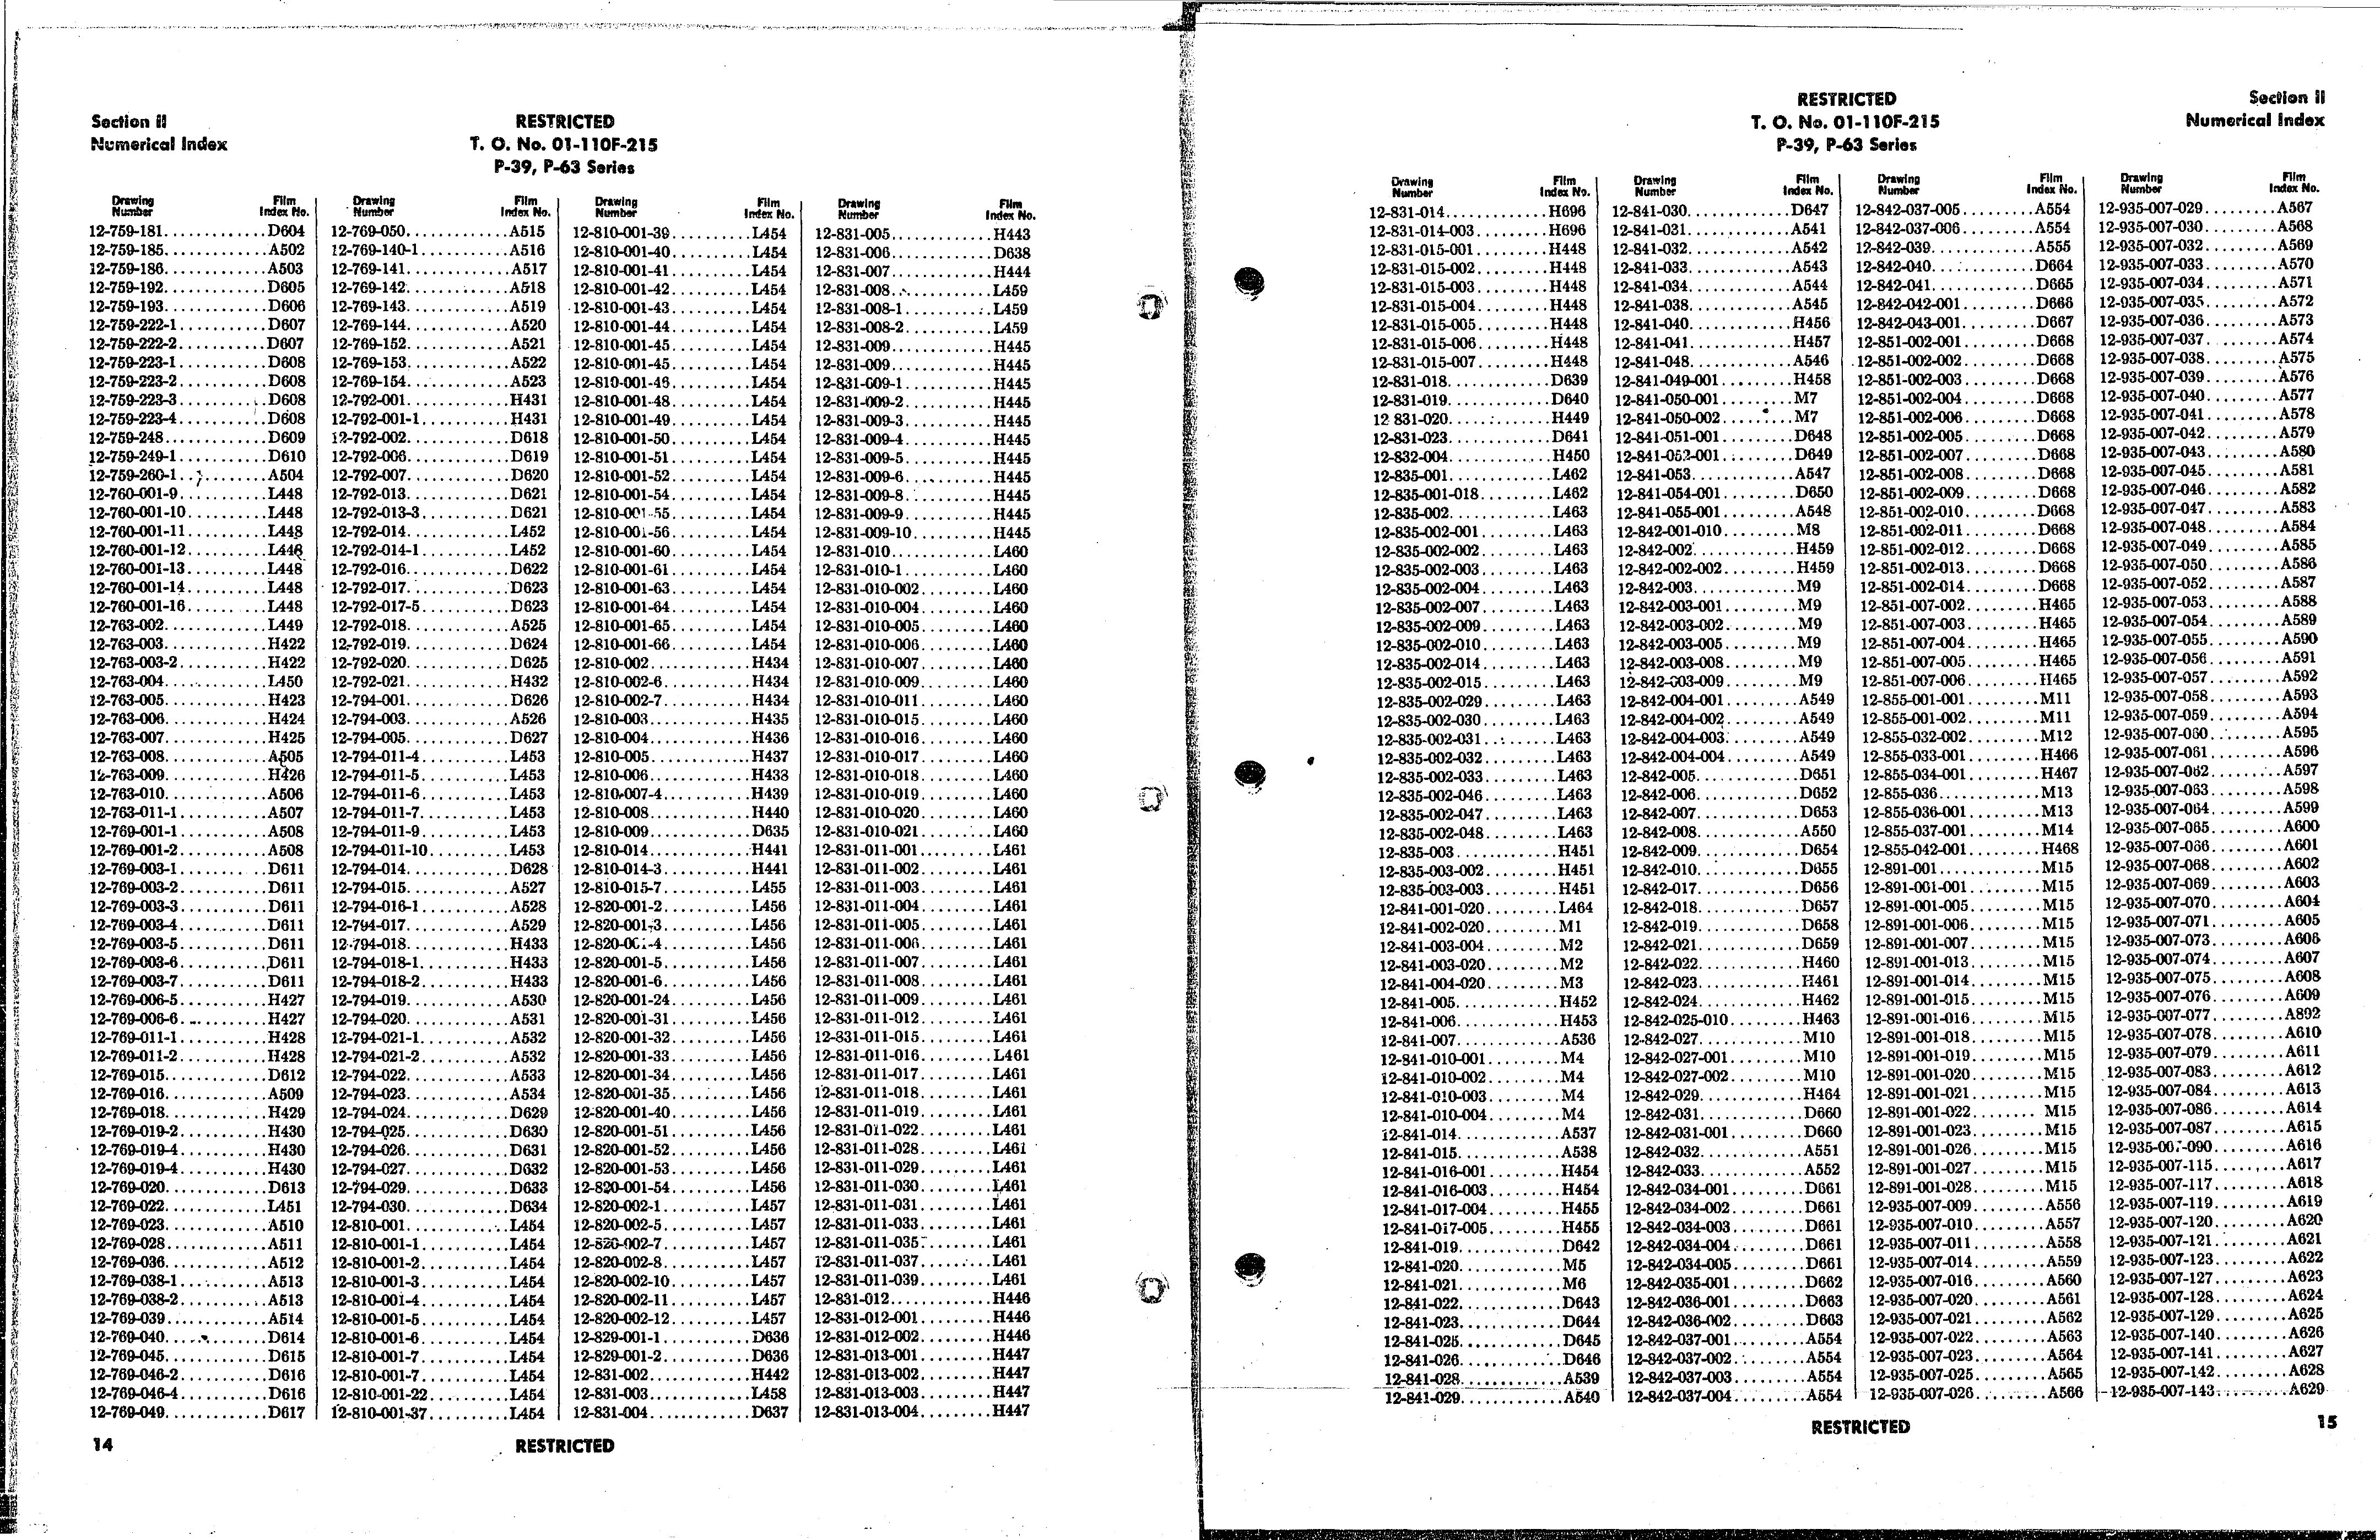 Sample page 10 from AirCorps Library document: Index of Drawings on Microfilm for the P-39 and P-63 Series